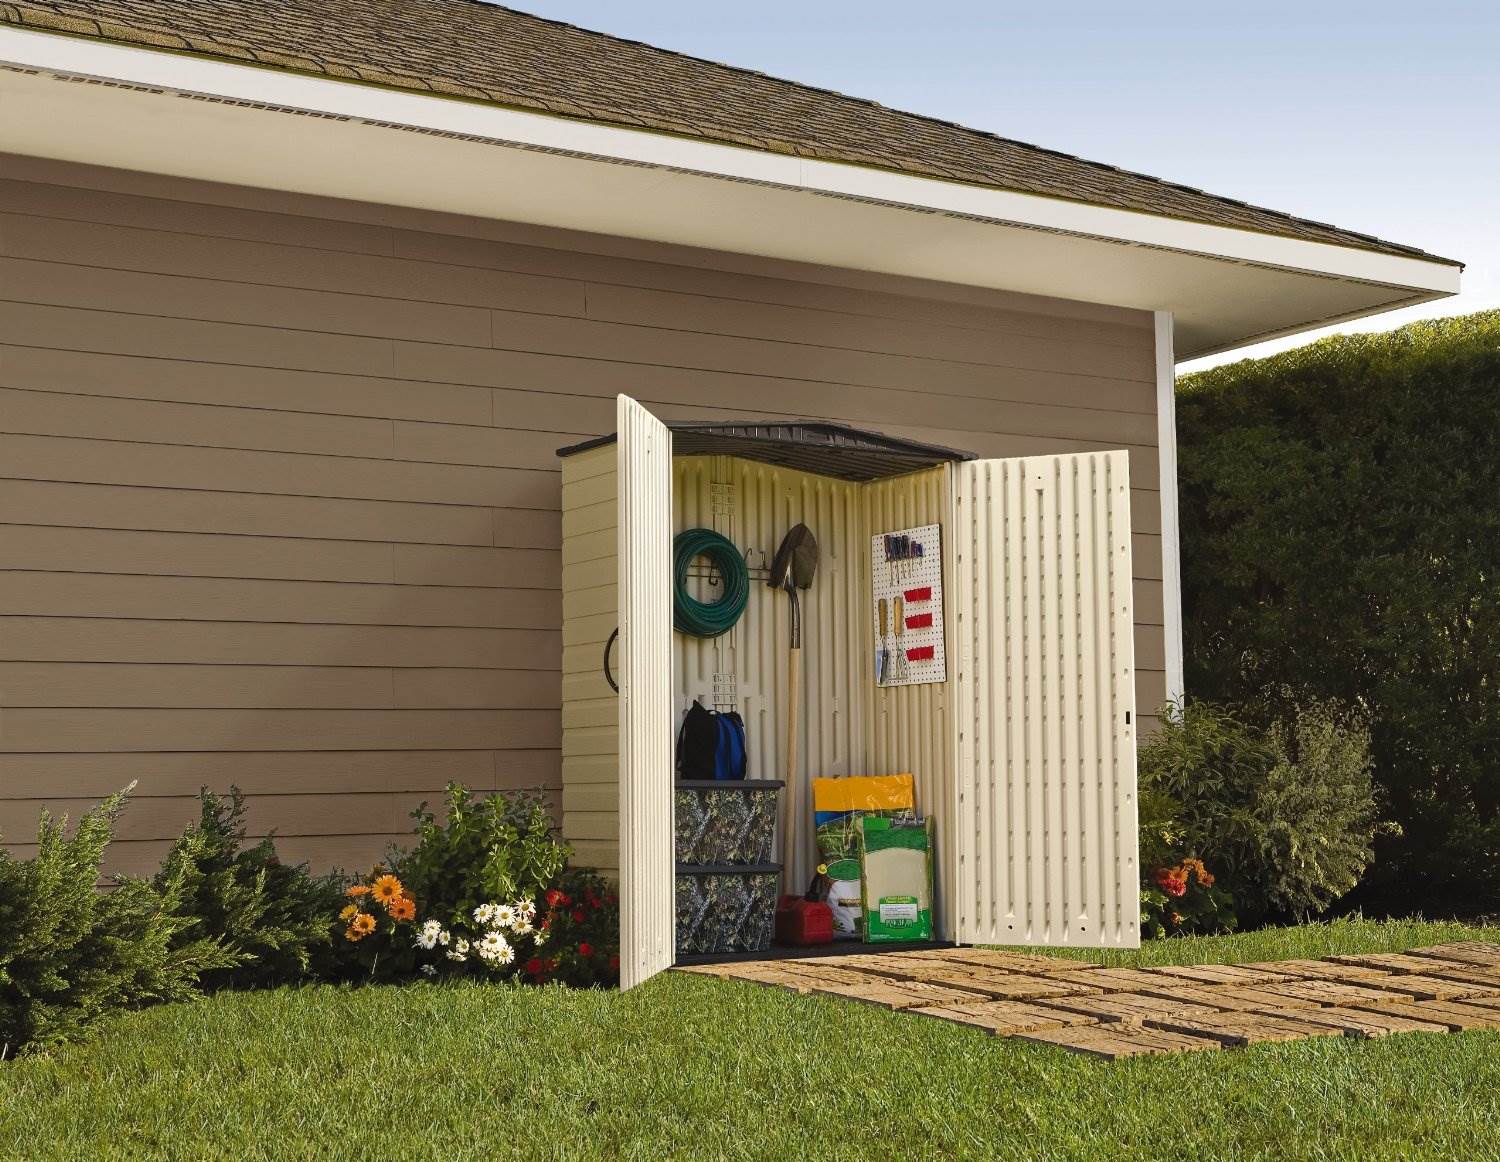 Rubbermaid 5 ft. x 2 ft. Vertical Shed - Small  78.5"L x 29.7"W x 14.4"H - image 2 of 3